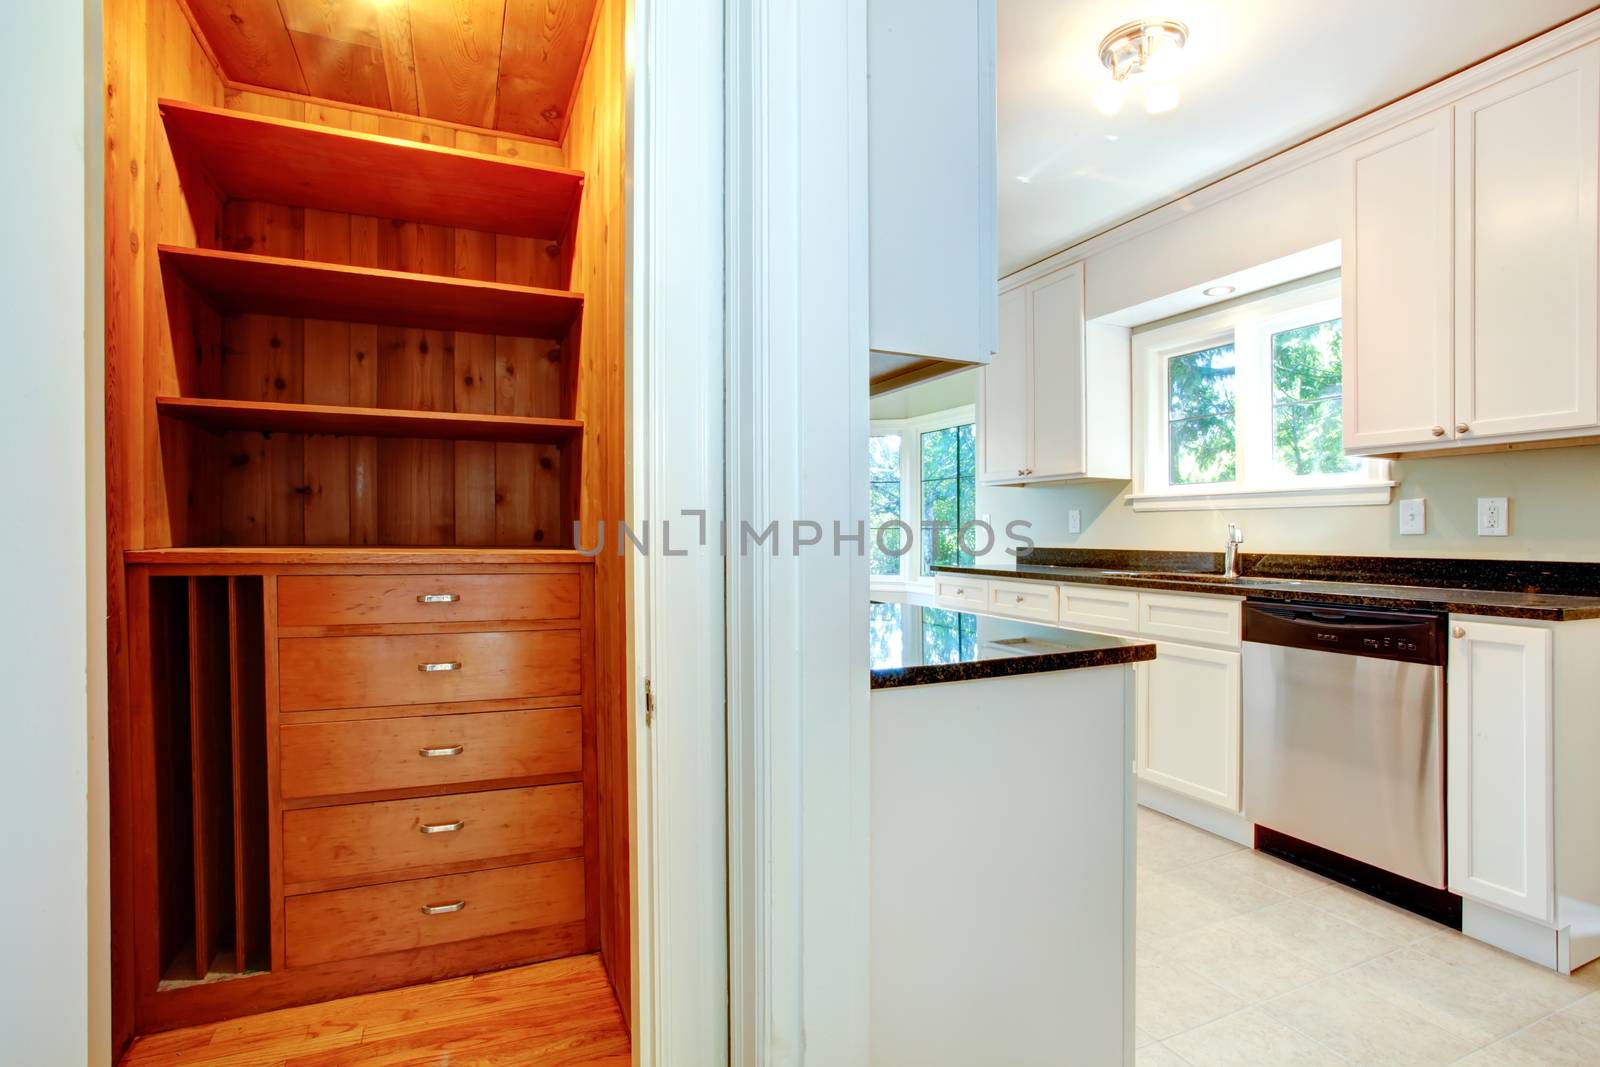 White ktichen room with wooden closet. Small closet with storage shelves and drawers